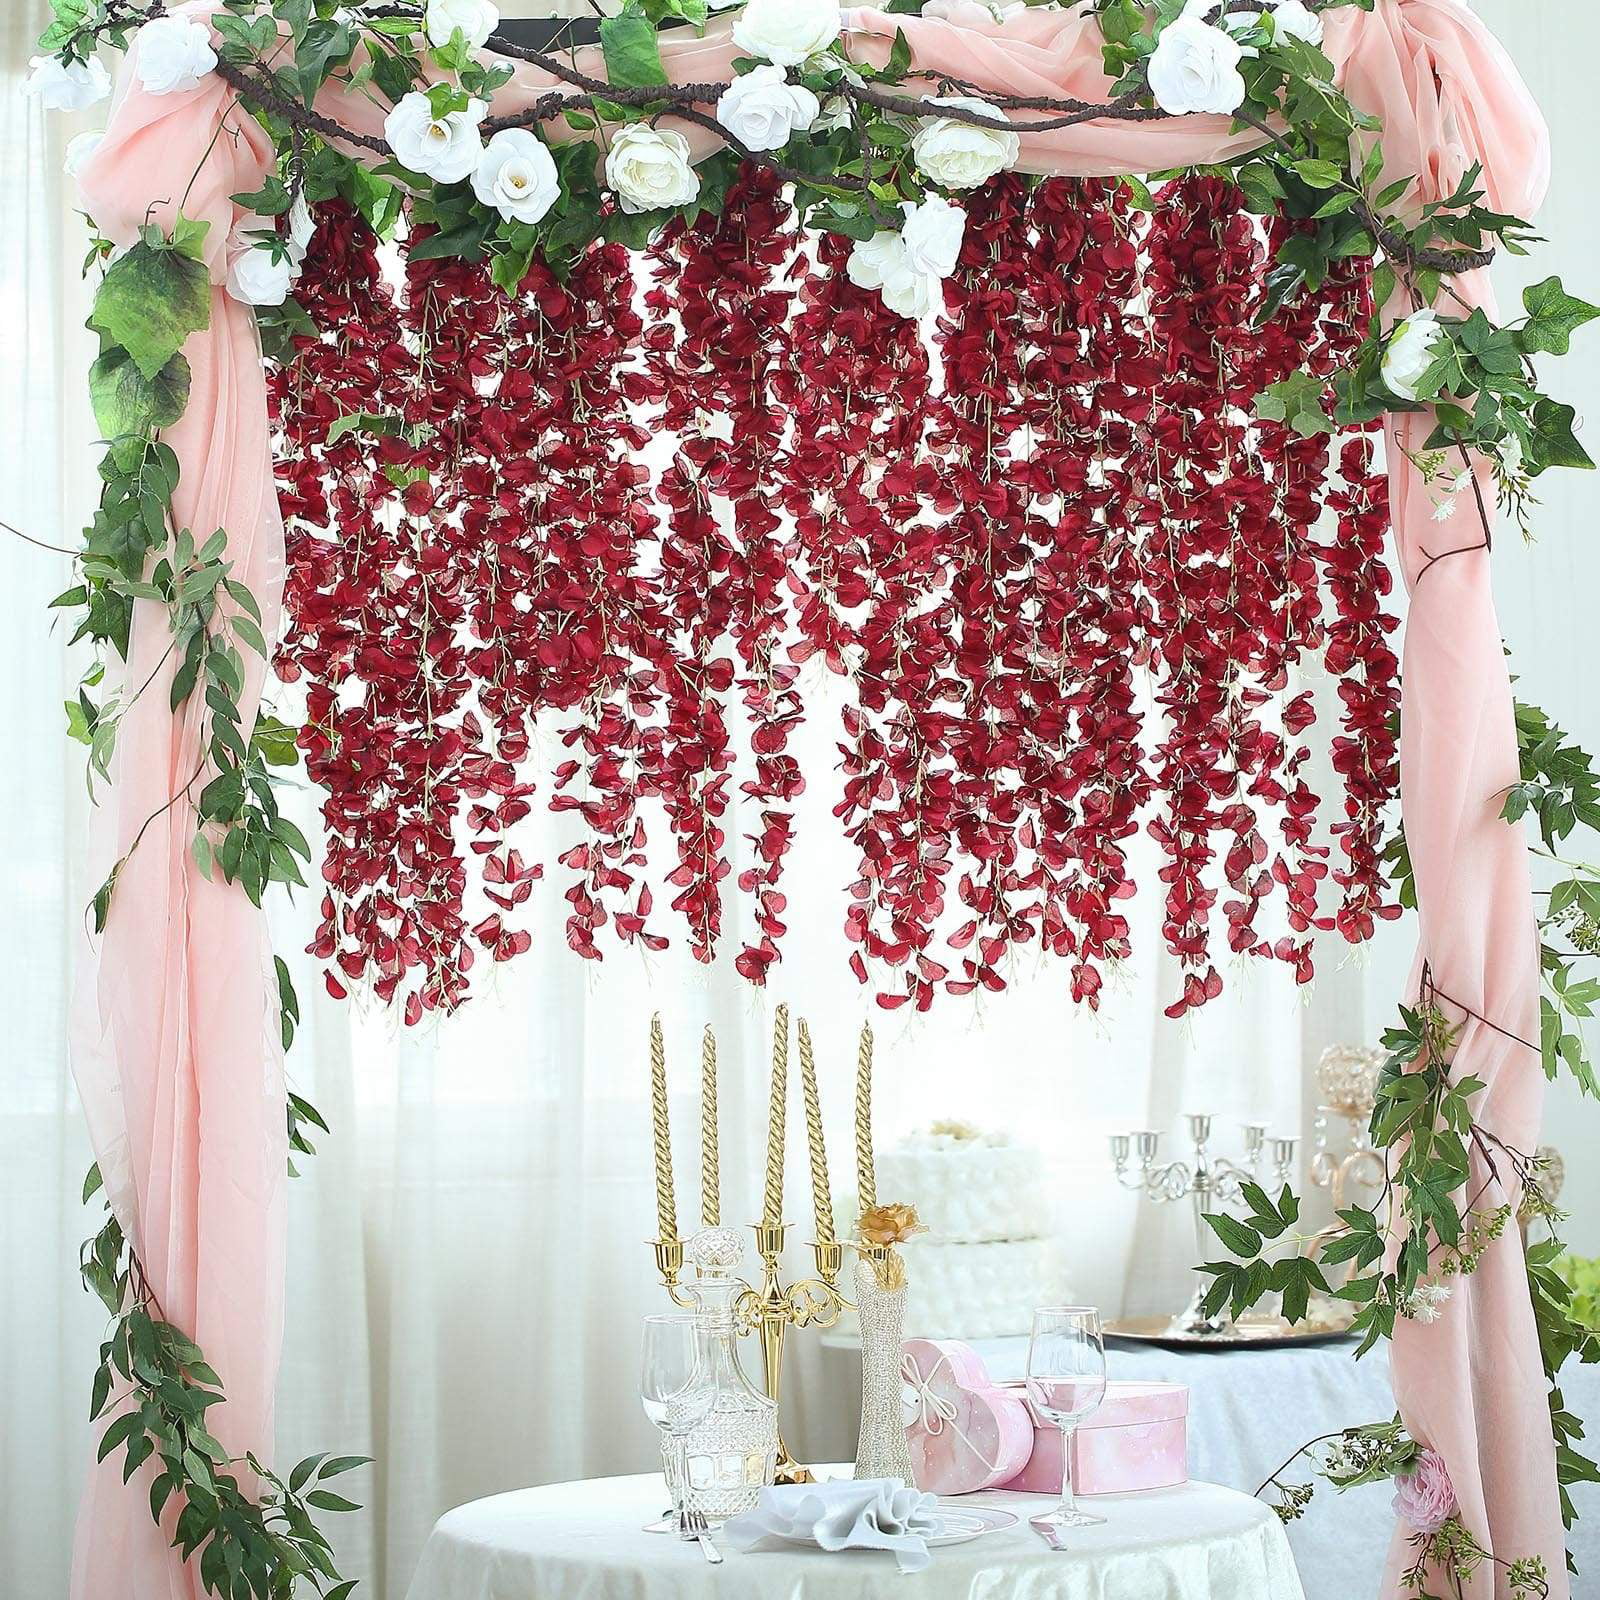 60pcs Acrylic Crystal Garland Hanging Wedding Party Table Decoration Centerpiece 